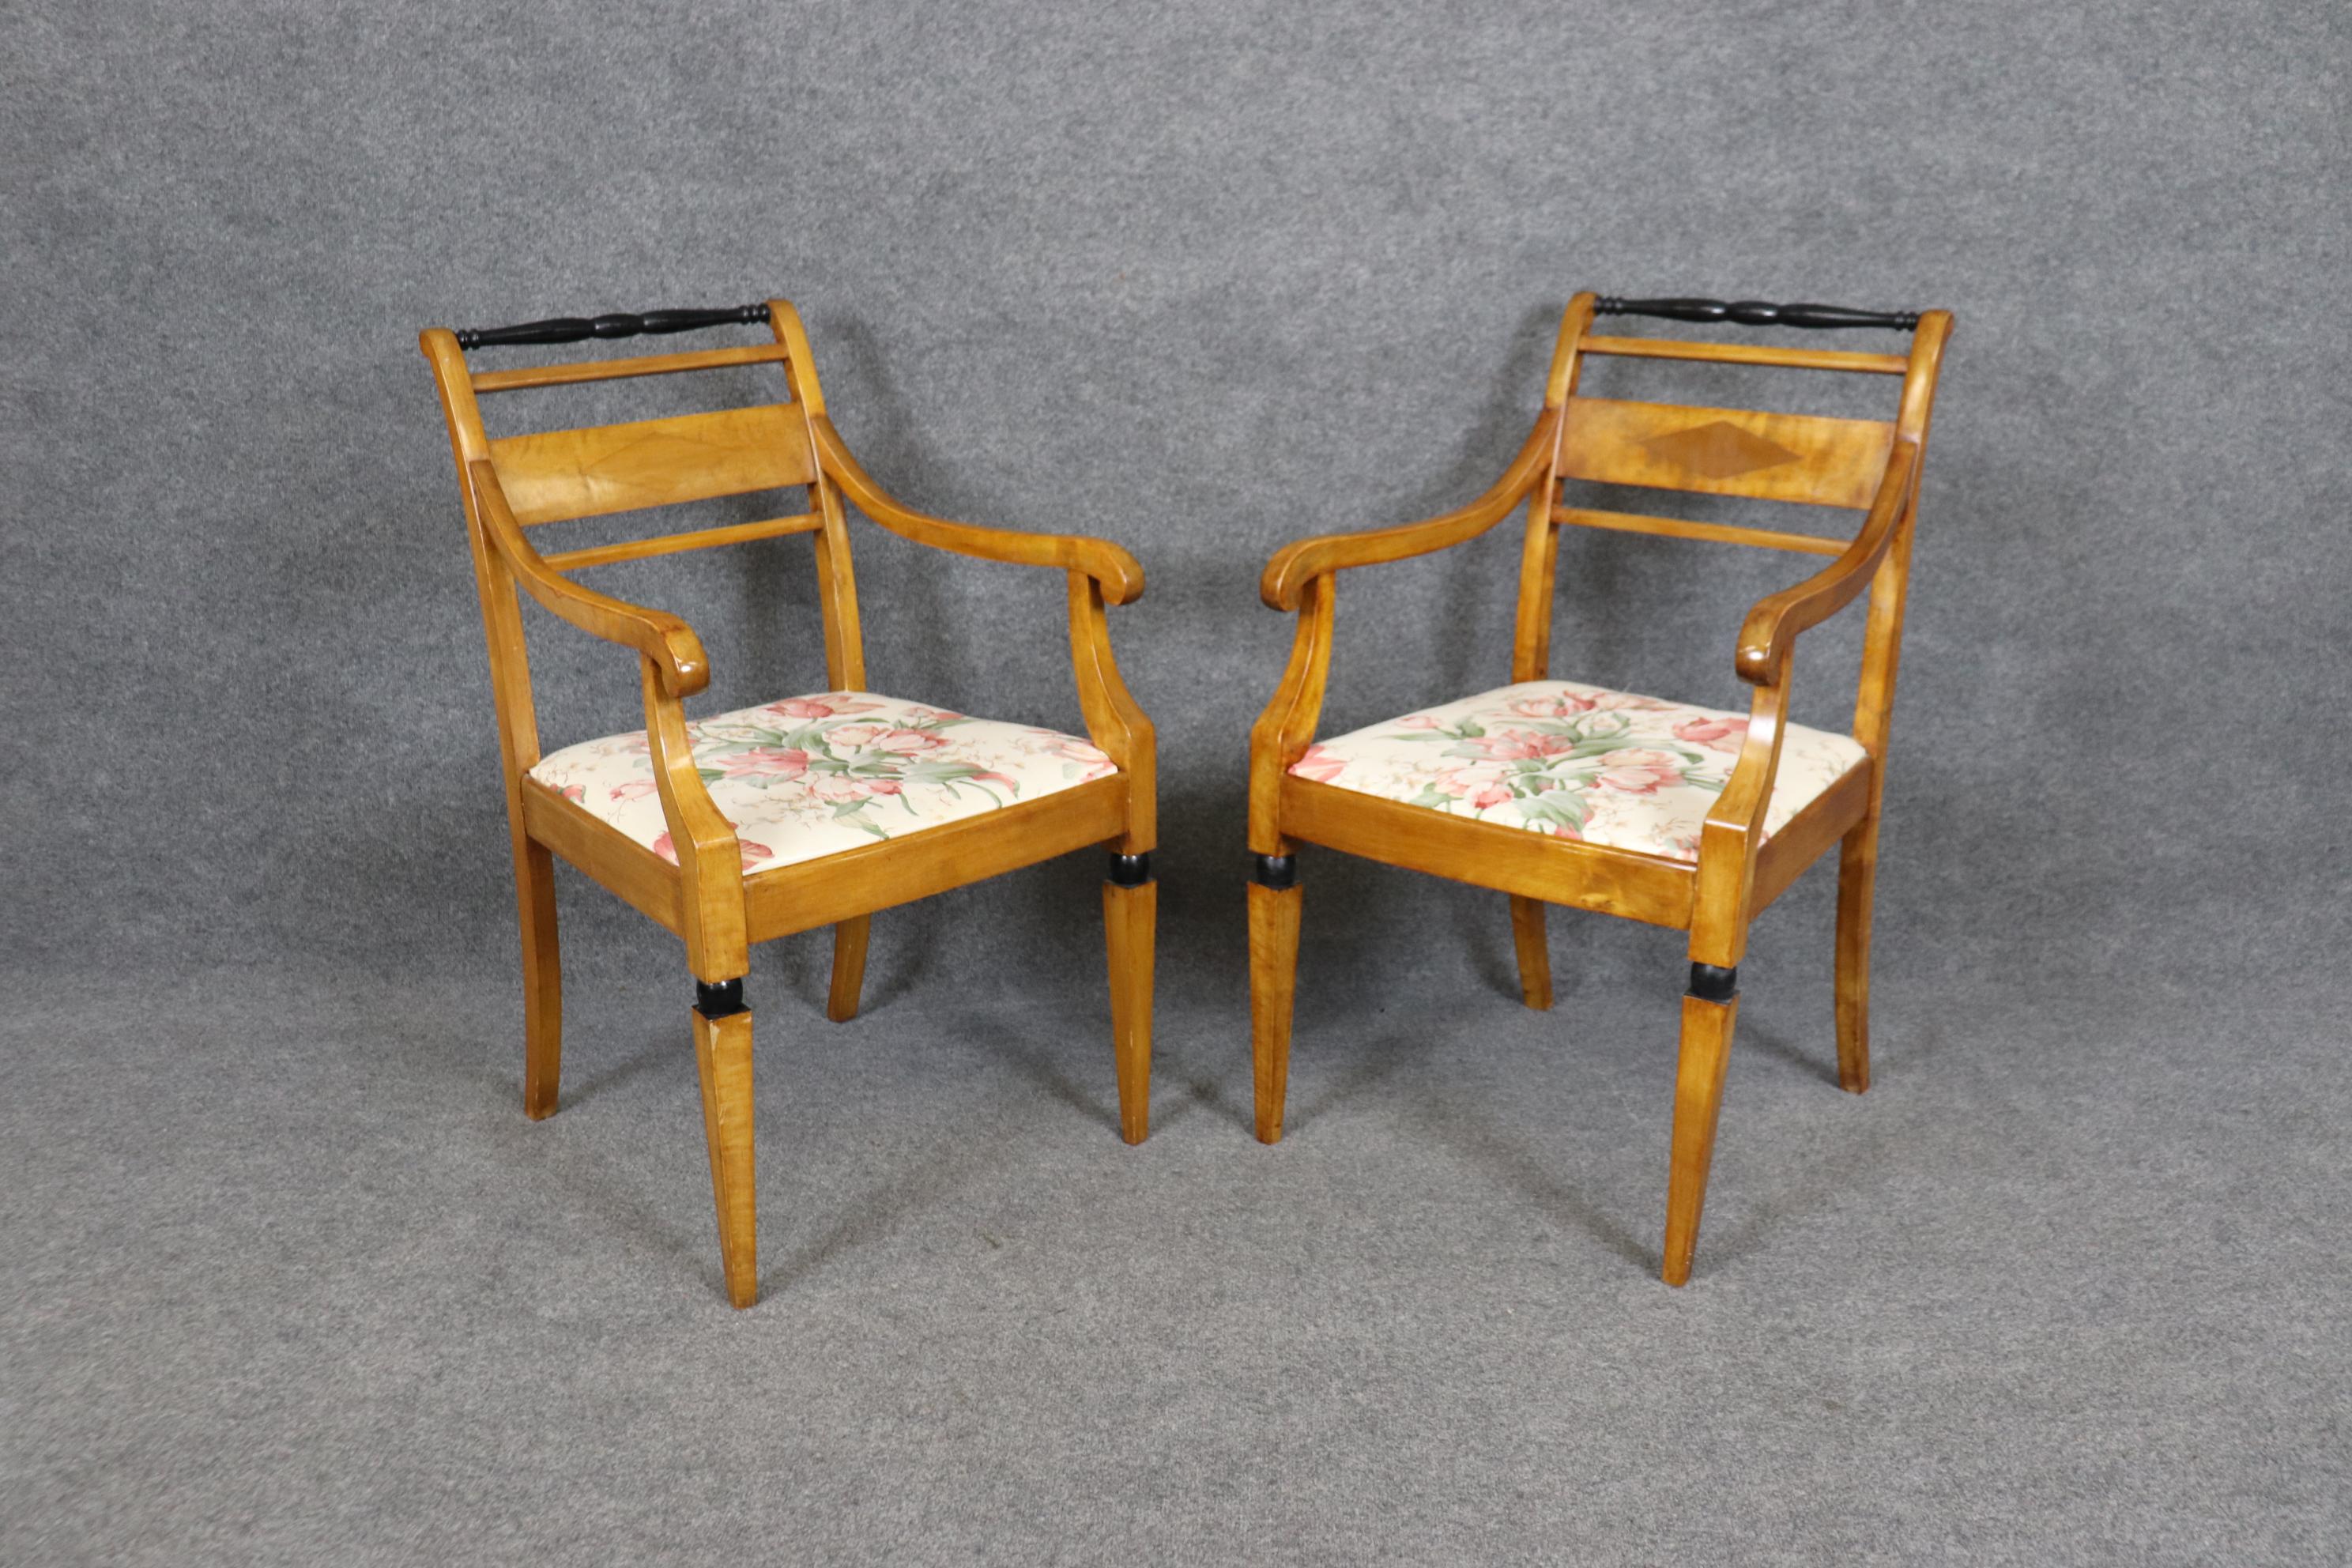 This is a beautiful pair of Biedermeier style chairs made during the 1900-1920s era with ebonized accents. The chairs will show signs of wear and use such as chips, nicks, and Scuffs to the frames. Measures 36.5 tall x 22.5 wide x 24 deep and seat